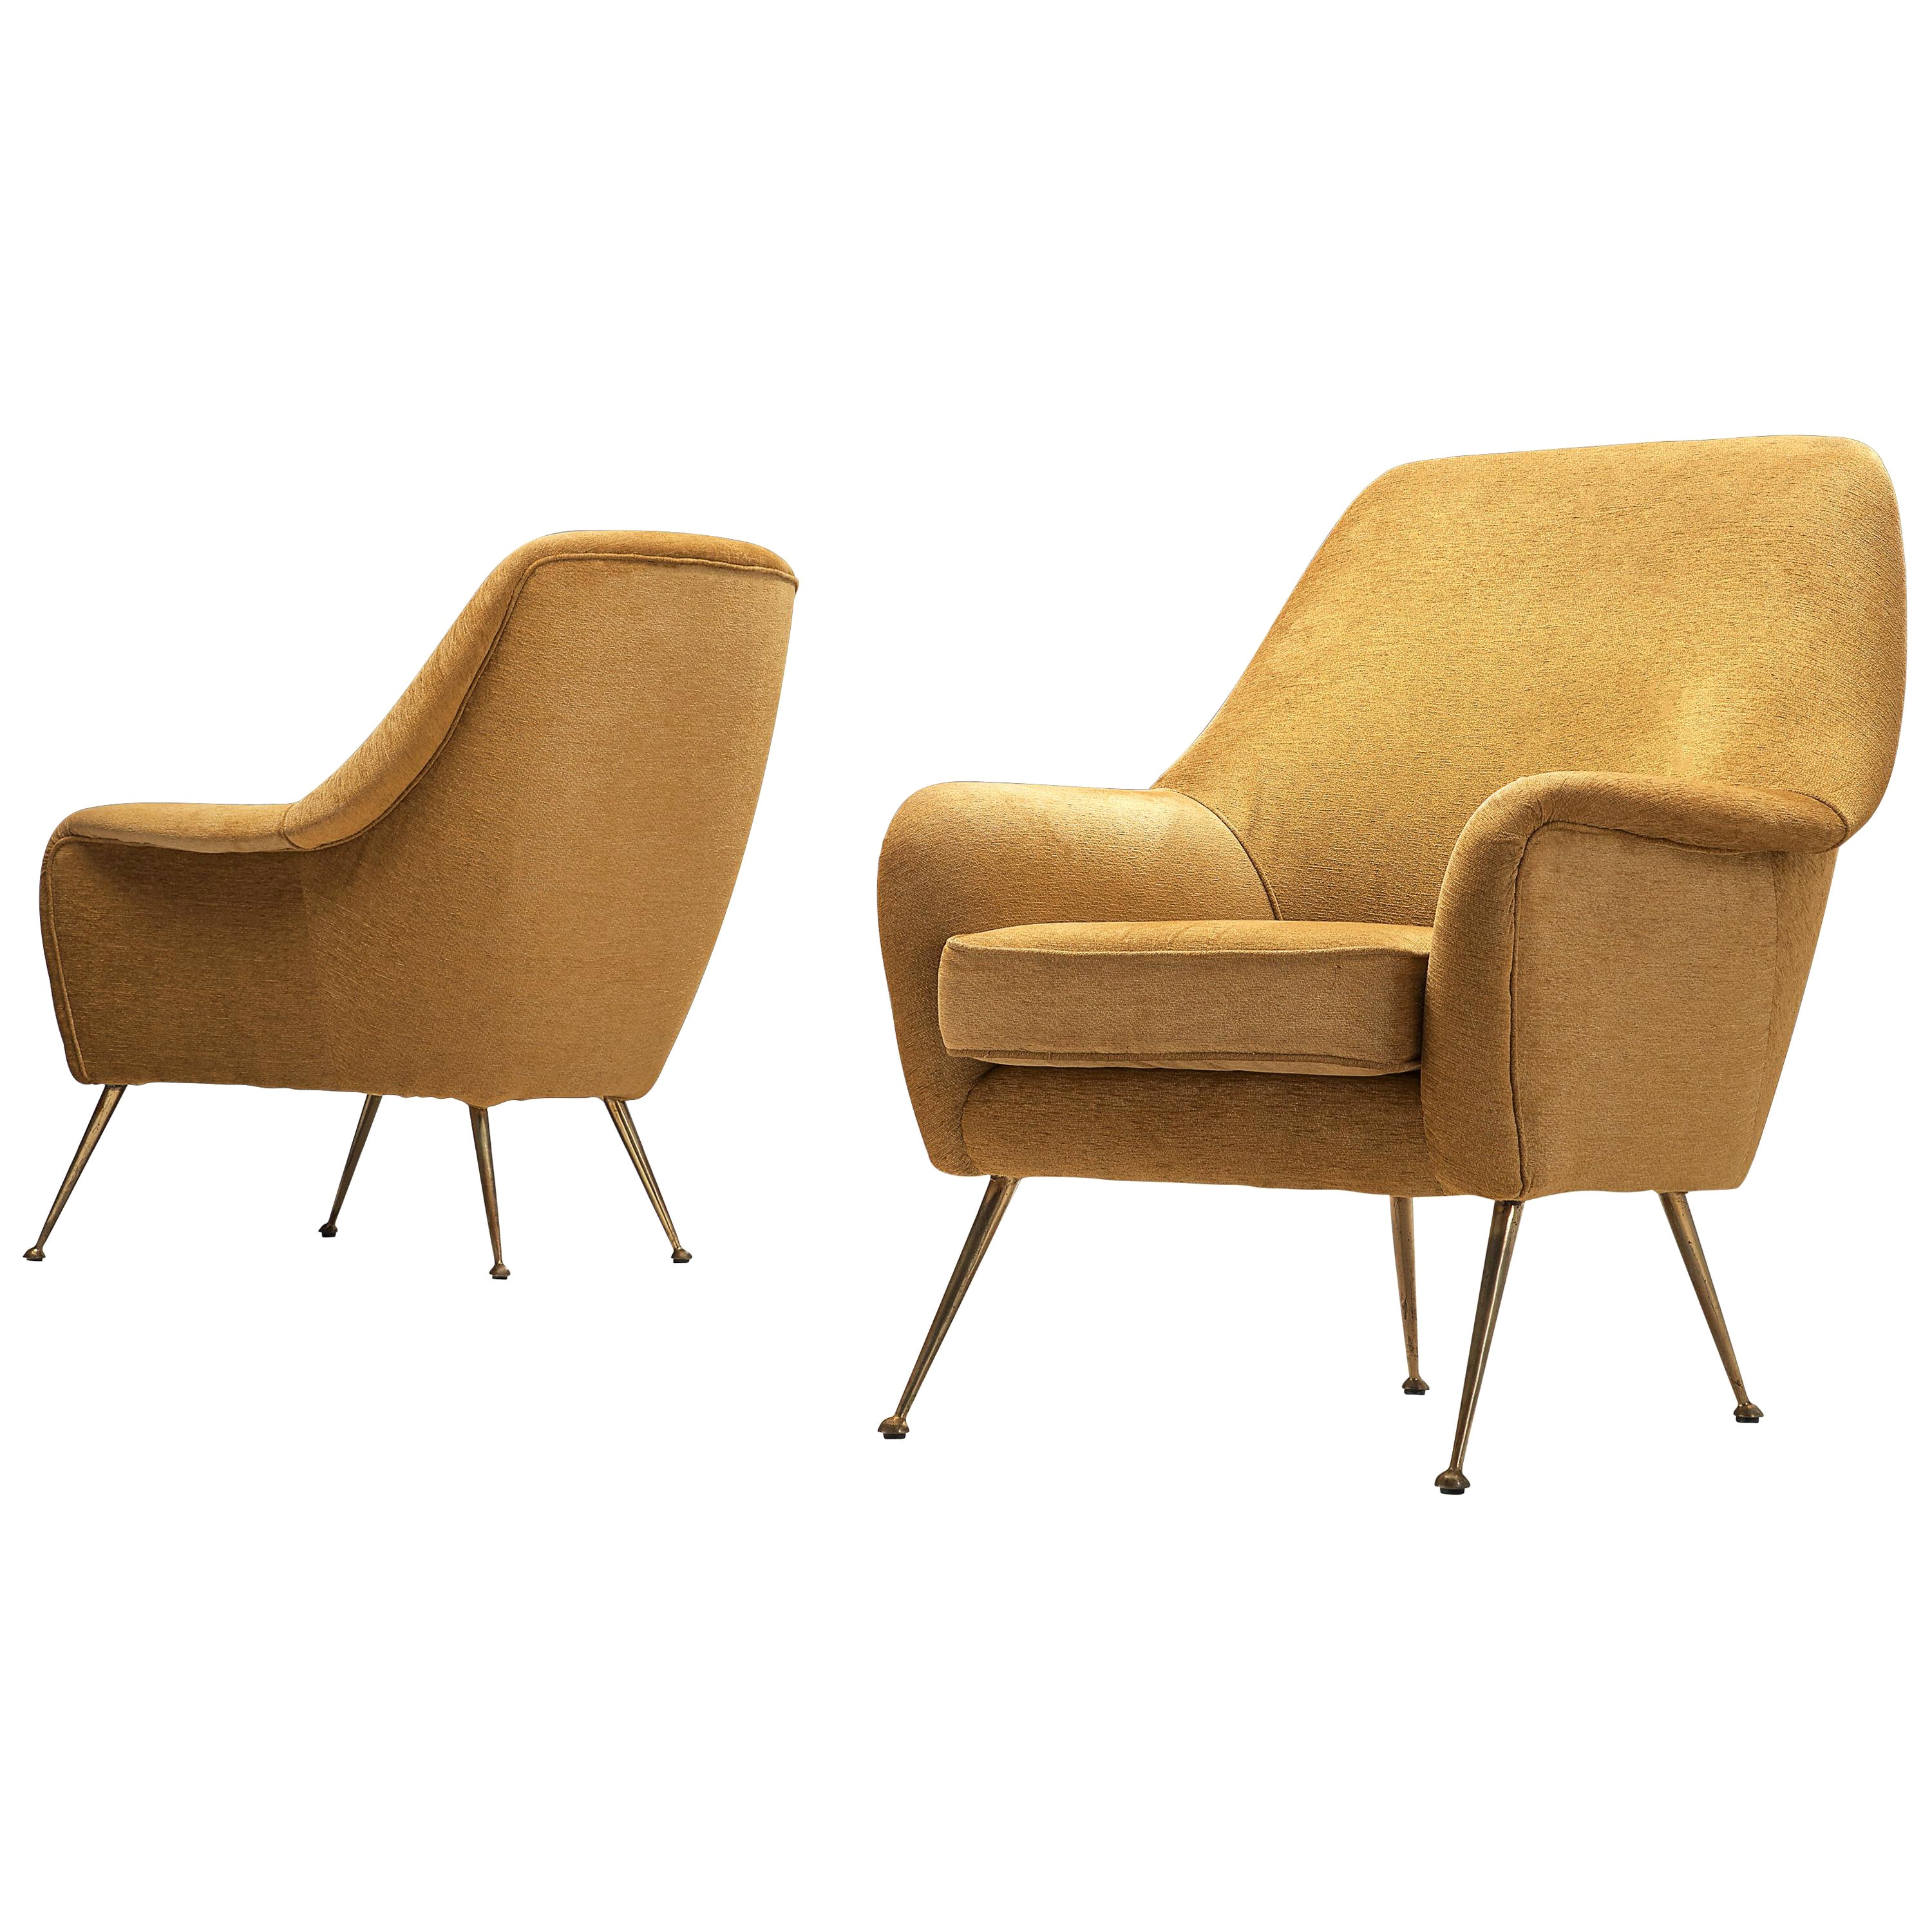 Italian Lounge Chairs in Yellow Upholstery